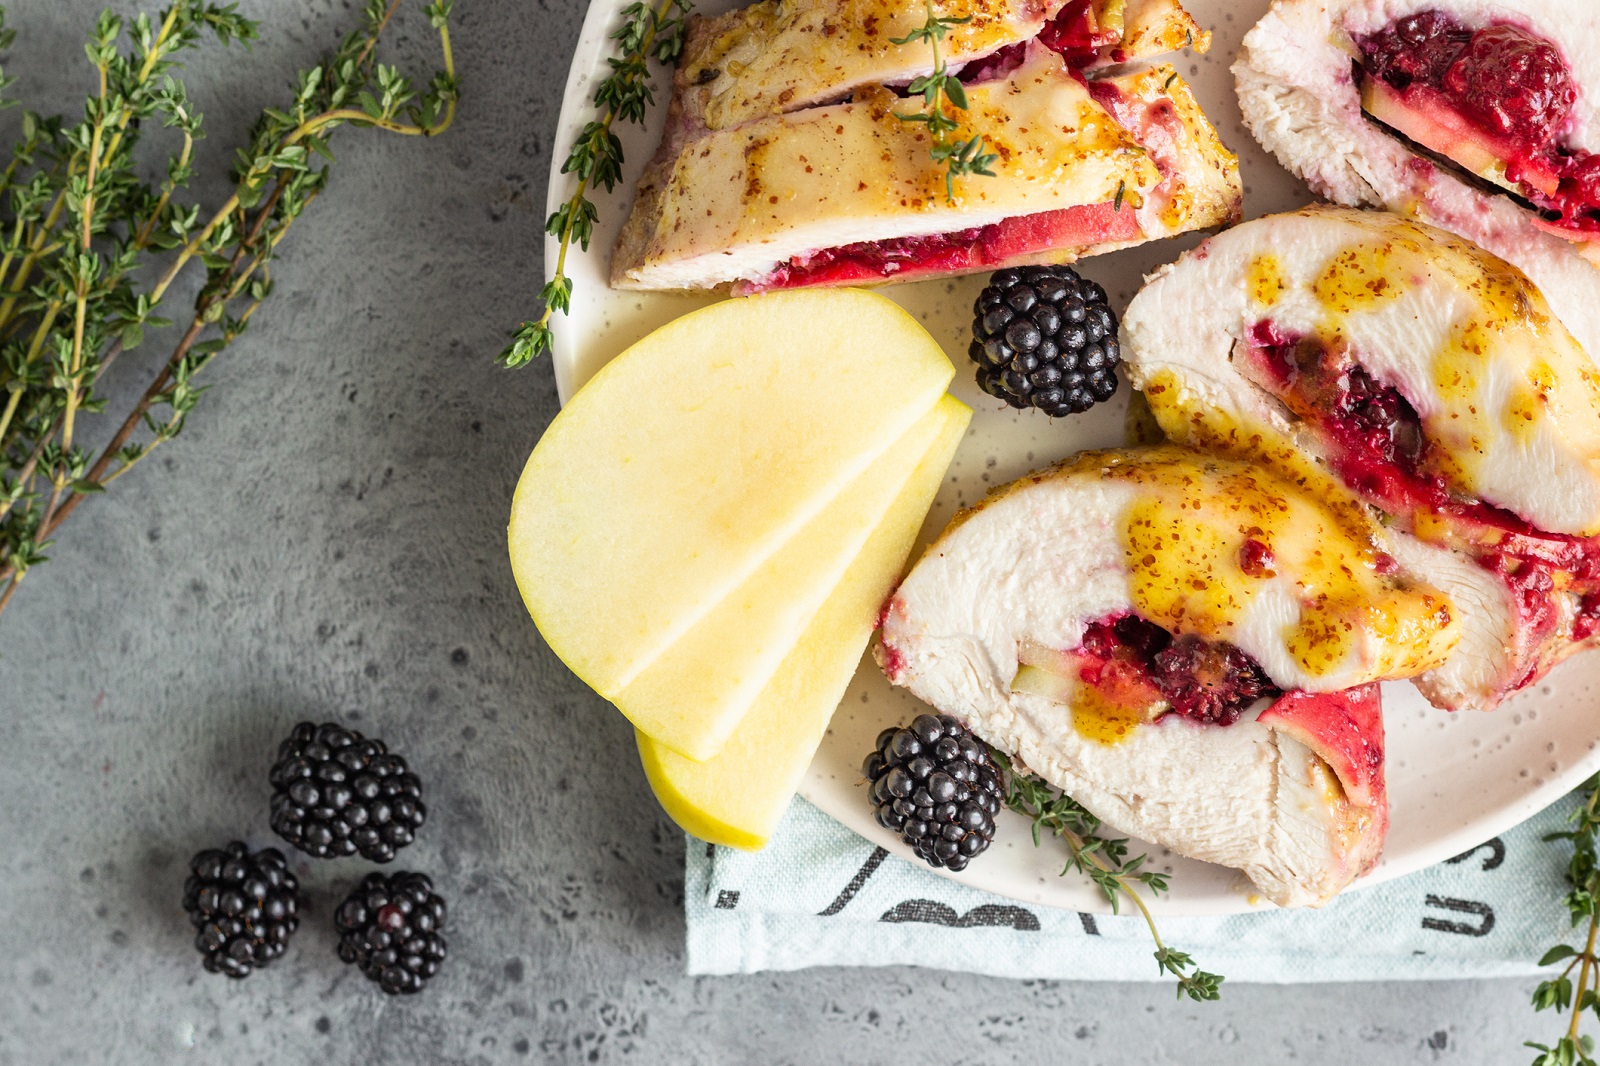 Baked turkey or chicken breast stuffed with apples and blackberries. Light grey background.